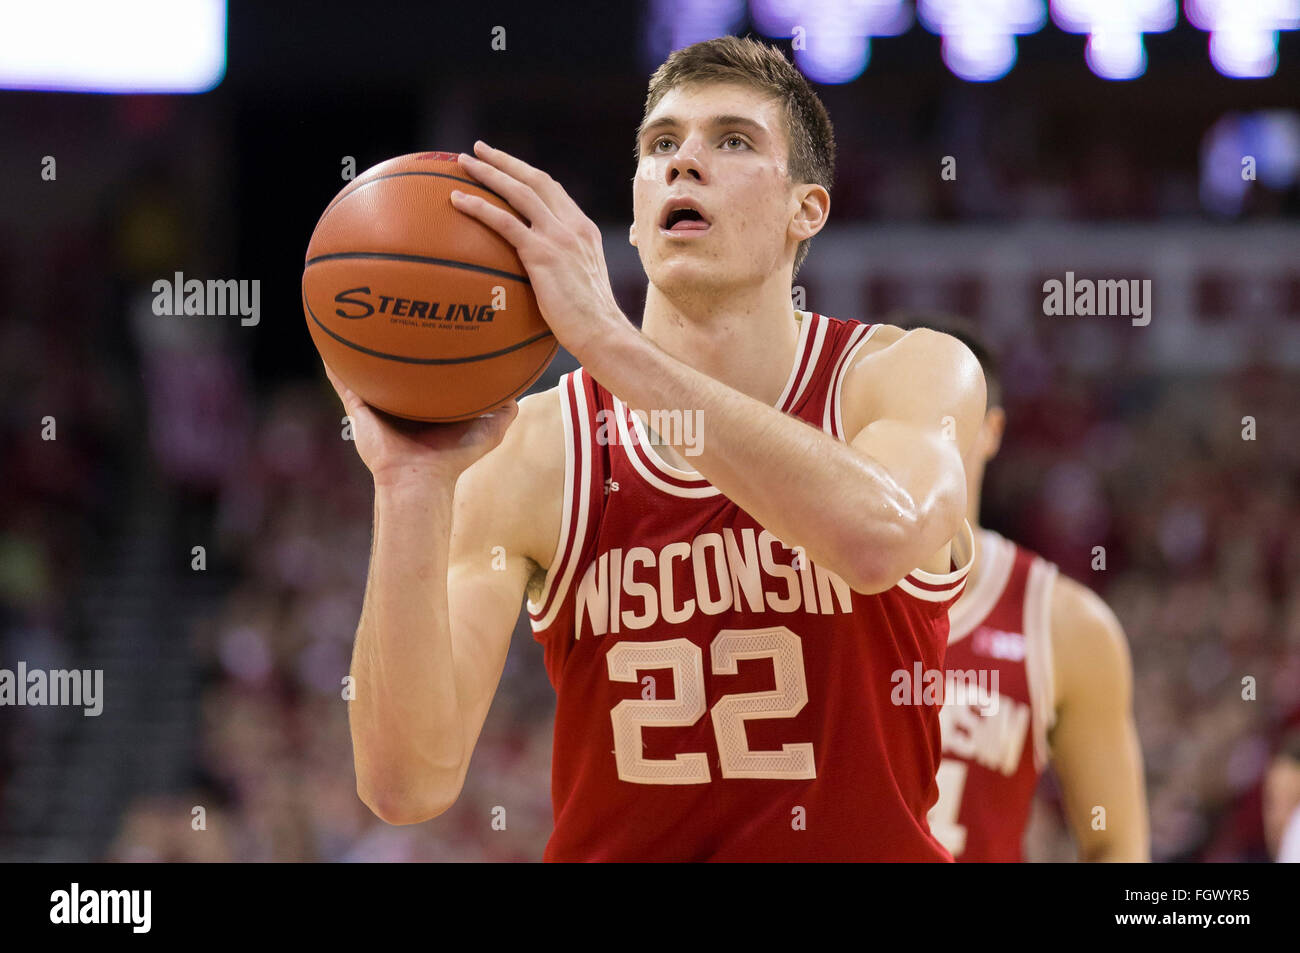 Madison, WI, USA. 21st Feb, 2016. Wisconsin Badgers forward Ethan Happ #22 at the free throw line during the NCAA Basketball game between the Illinois Fighting Illini and the Wisconsin Badgers at the Kohl Center in Madison, WI. Wisconsin defeated Illinois 69-60. John Fisher/CSM/Alamy Live News Stock Photo